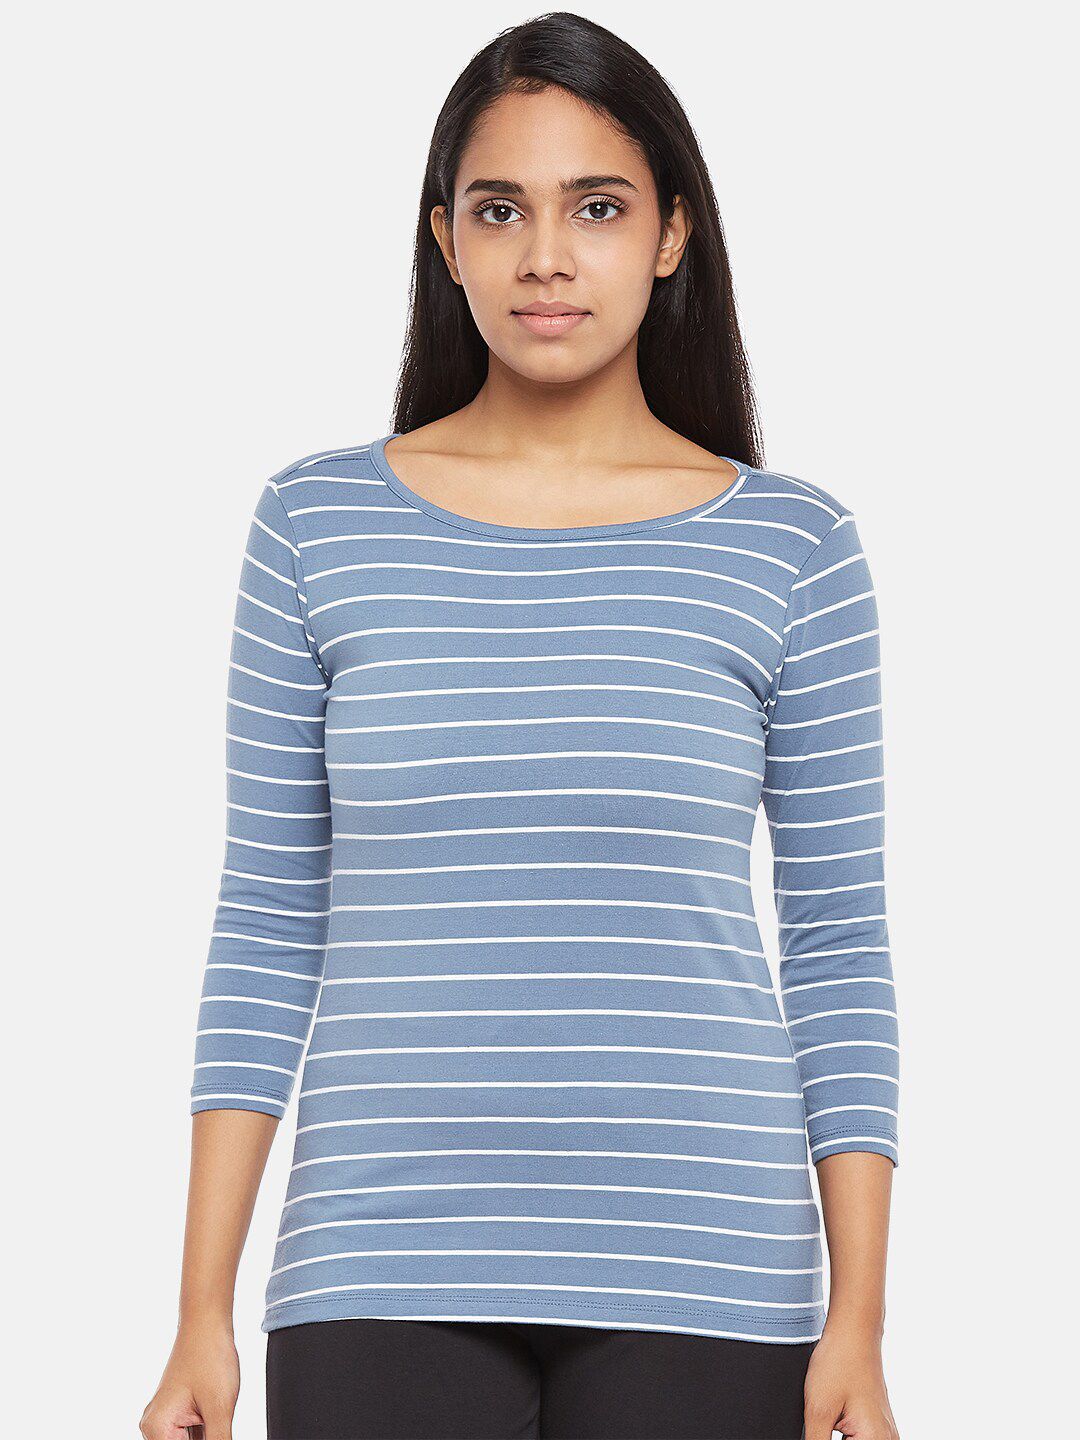 Dreamz by Pantaloons Women Blue & White Striped Lounge T-shirt Price in India